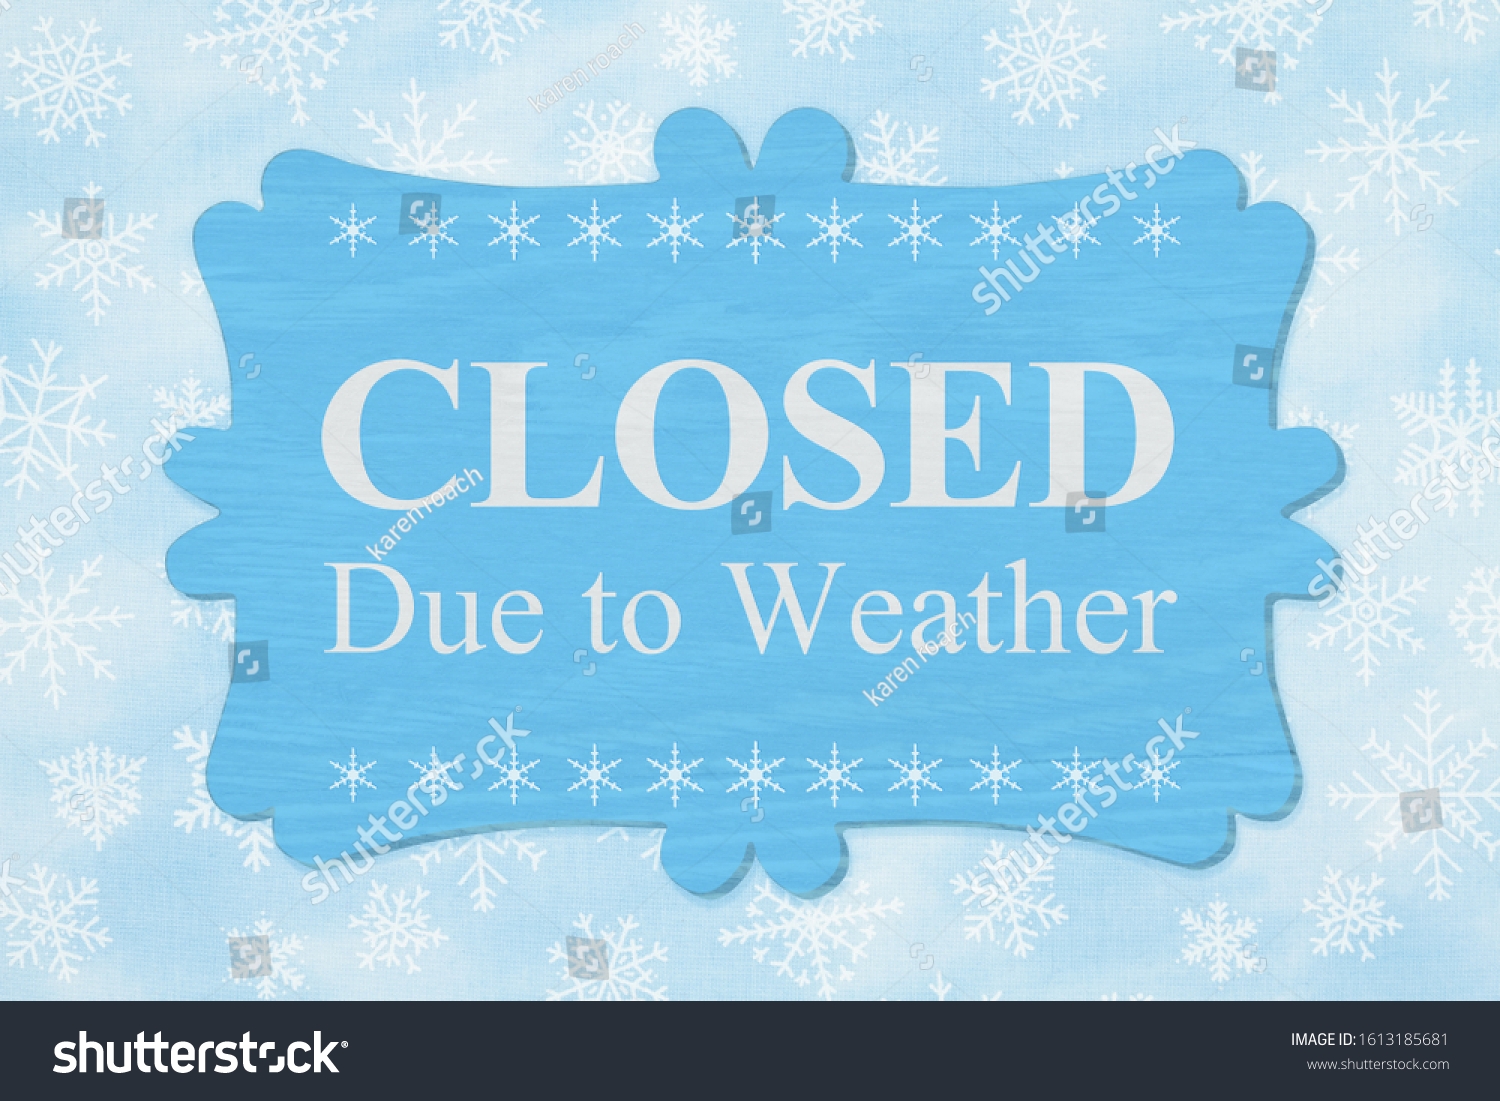 886 Closed Due Weather Royalty Free Photos And Stock Images Shutterstock